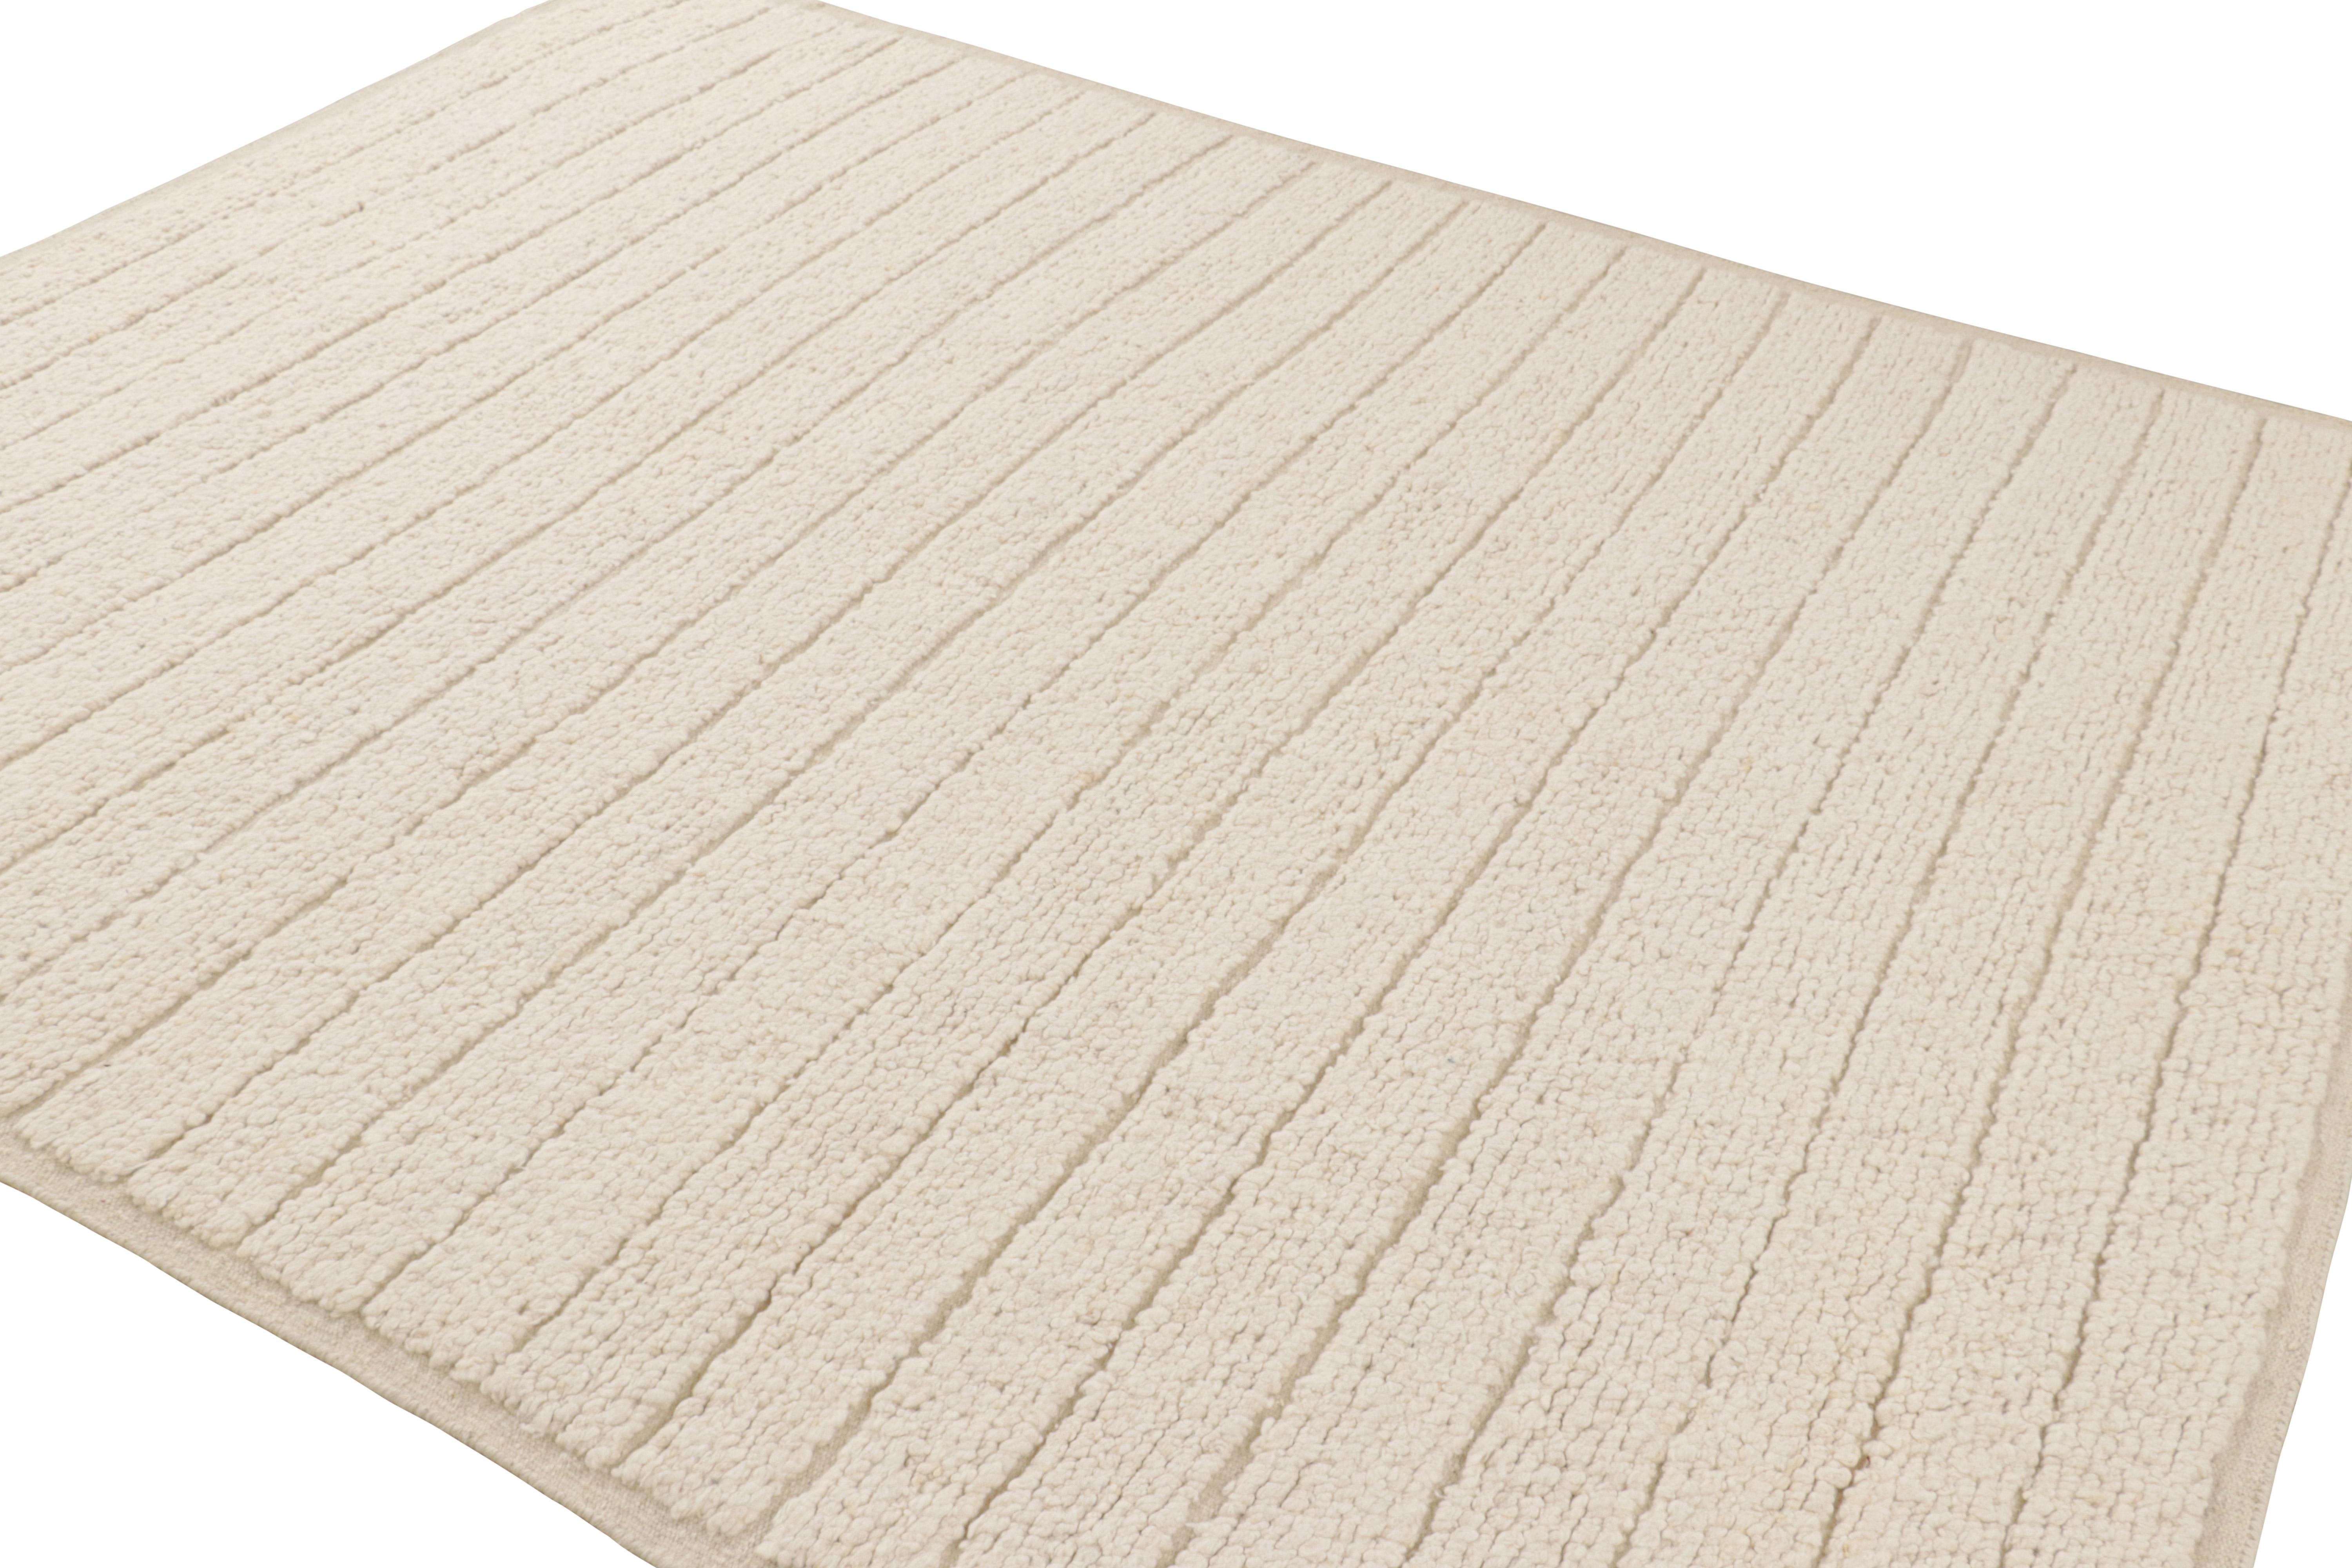 Indian Rug & Kilim’s Textural Kilim Rug in Cream and White High-Low Stripes For Sale